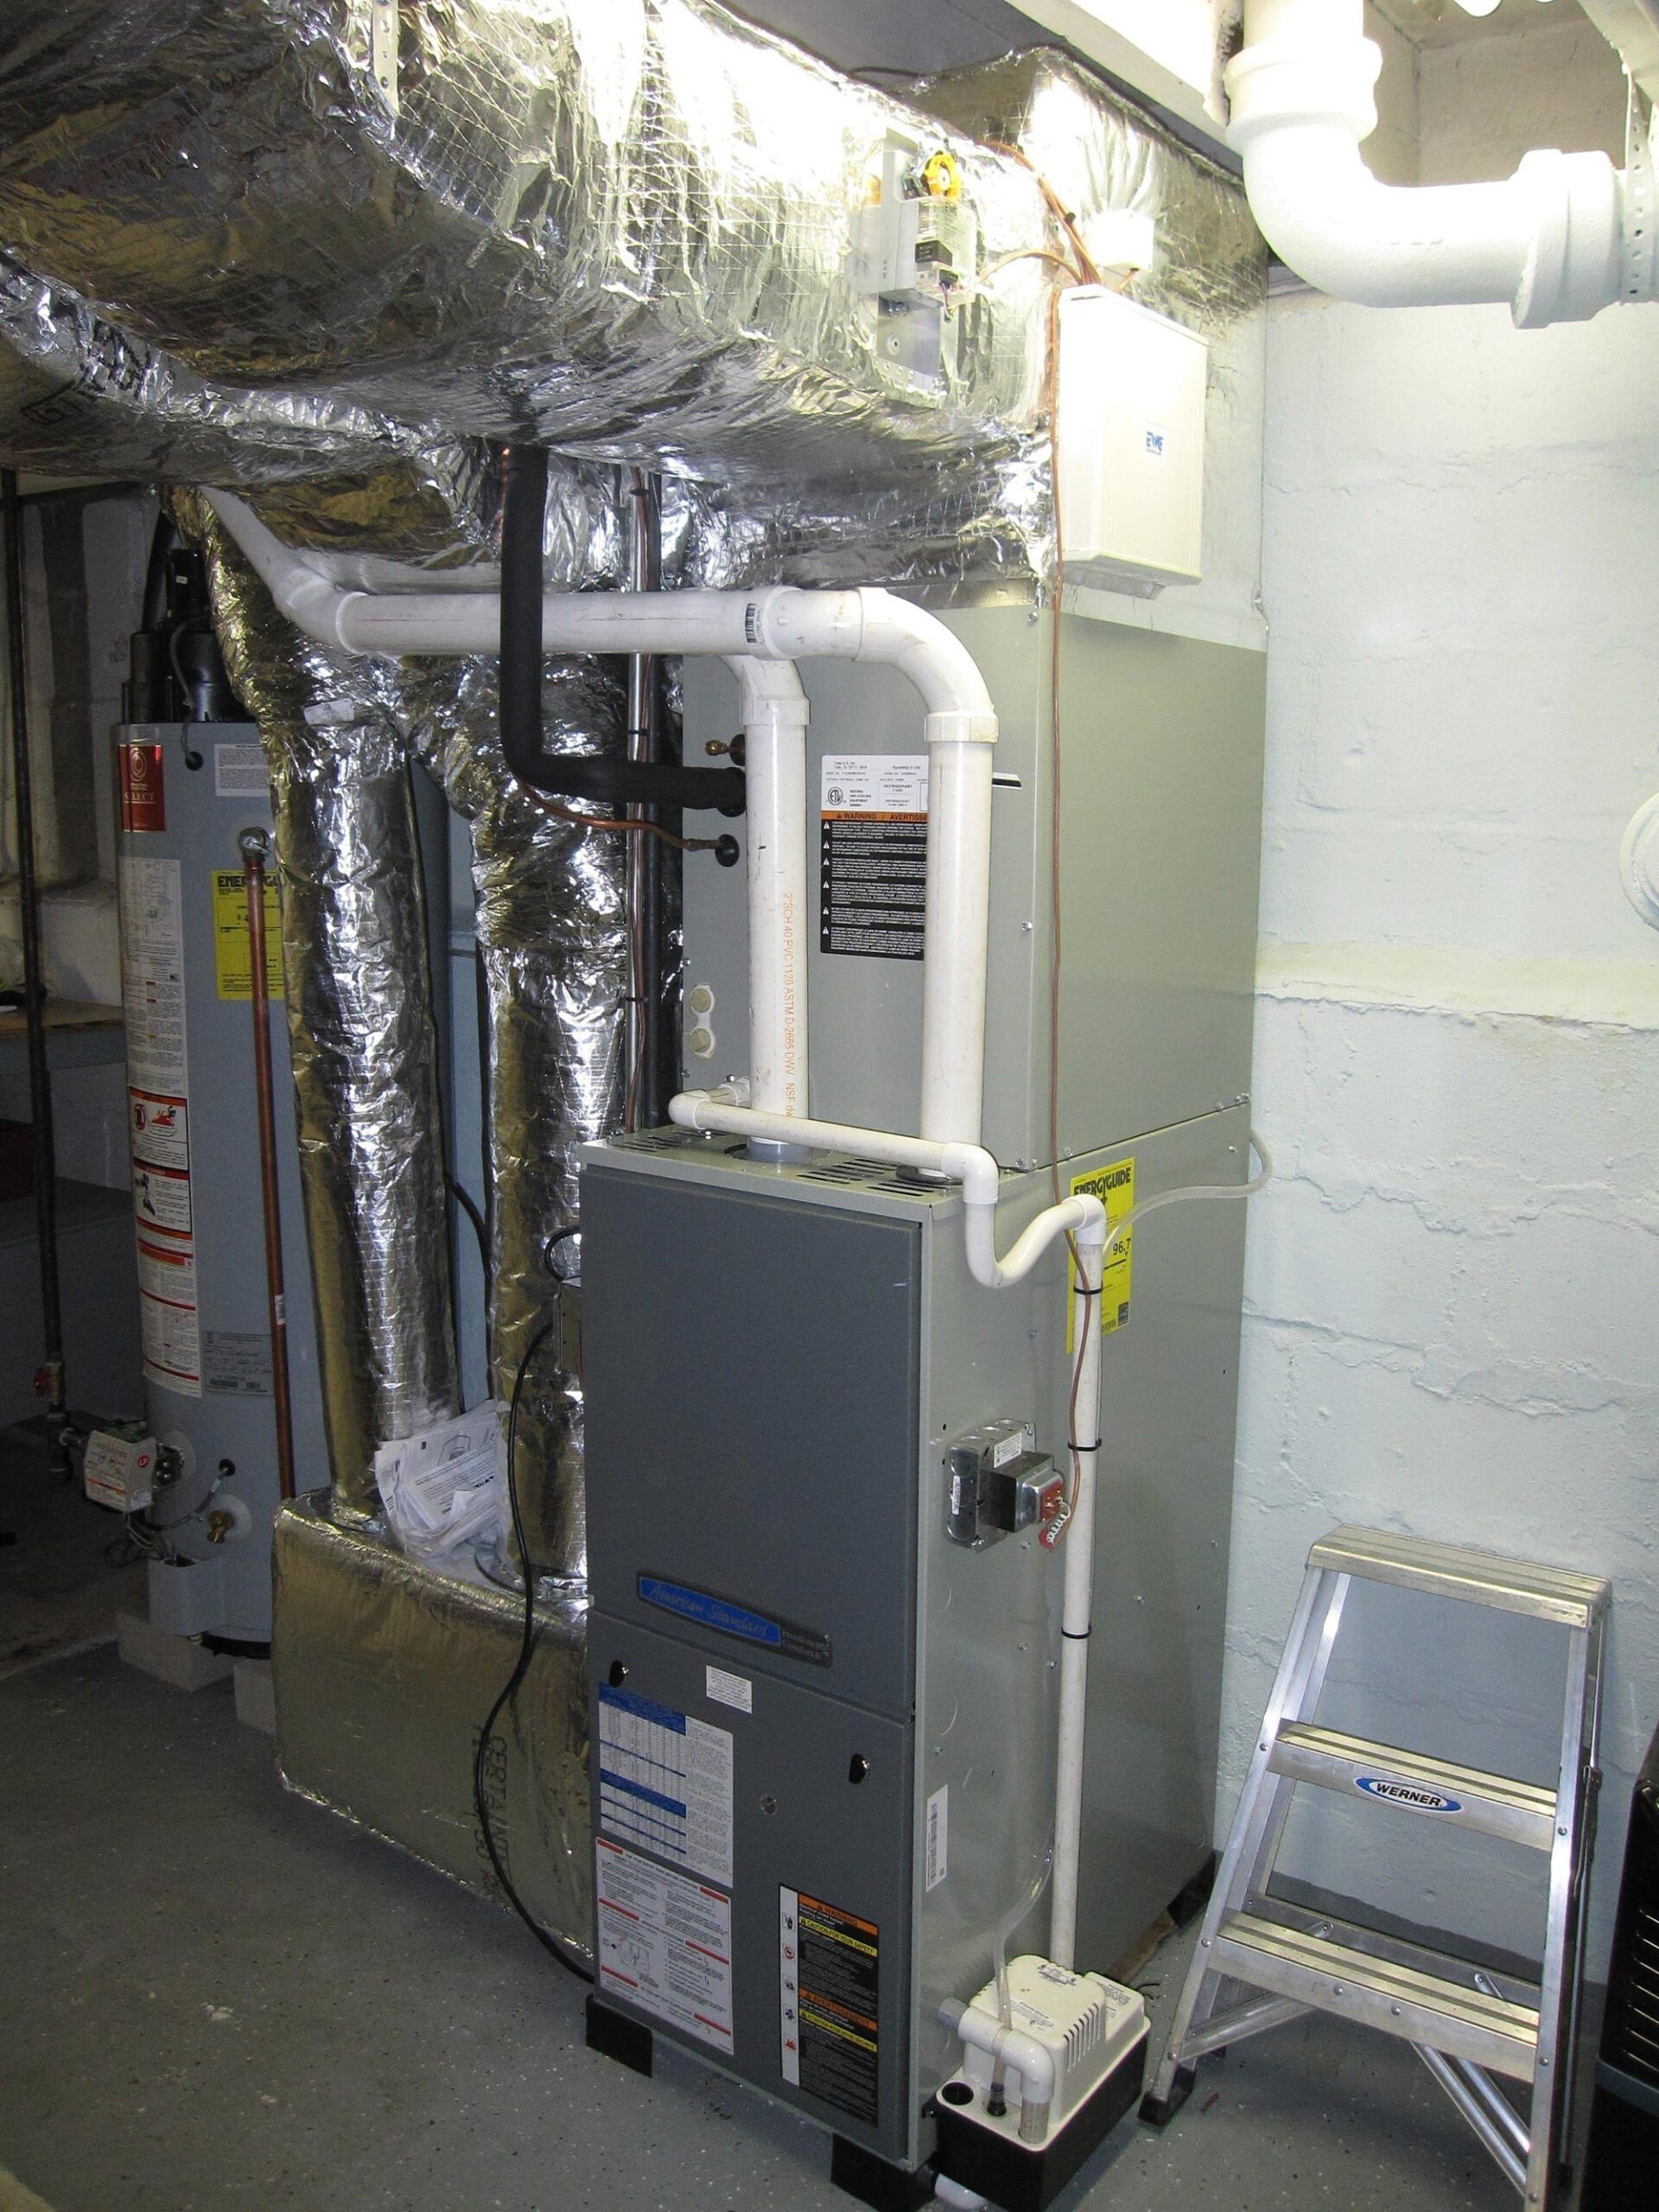 Gas Furnace With Add on AC System And Hot Water Tank